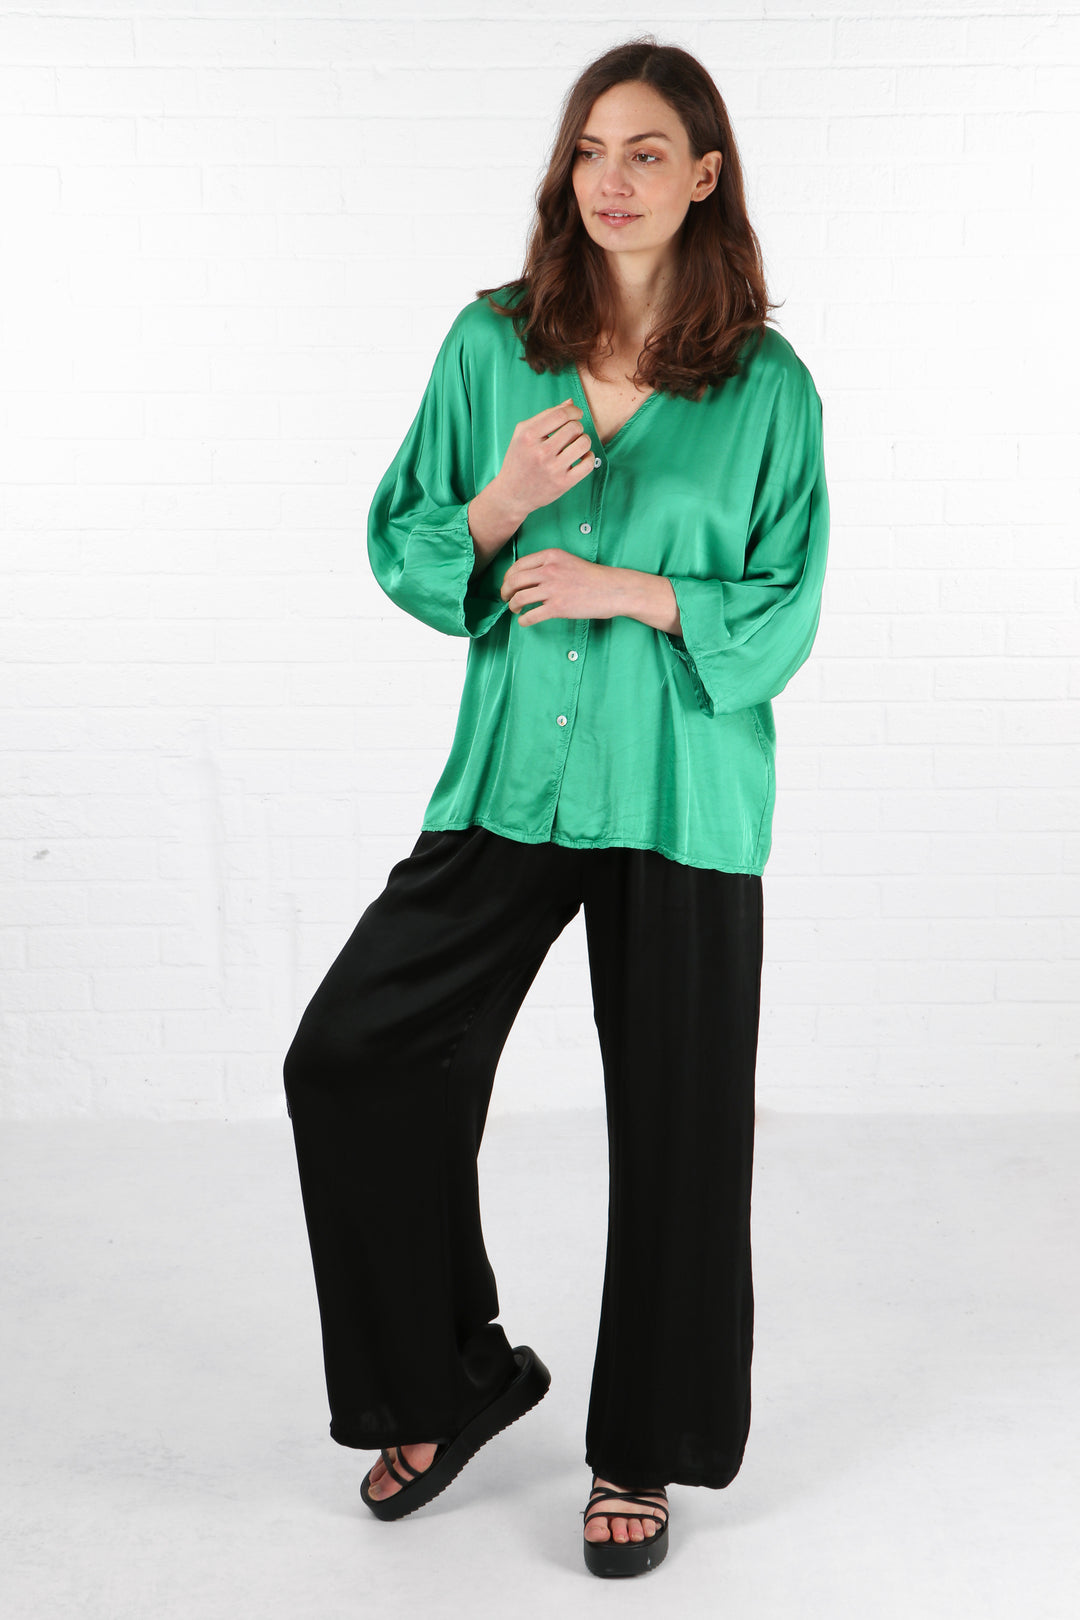 model showing the 3/4 length loose fitting sleeves of the green silky shirt